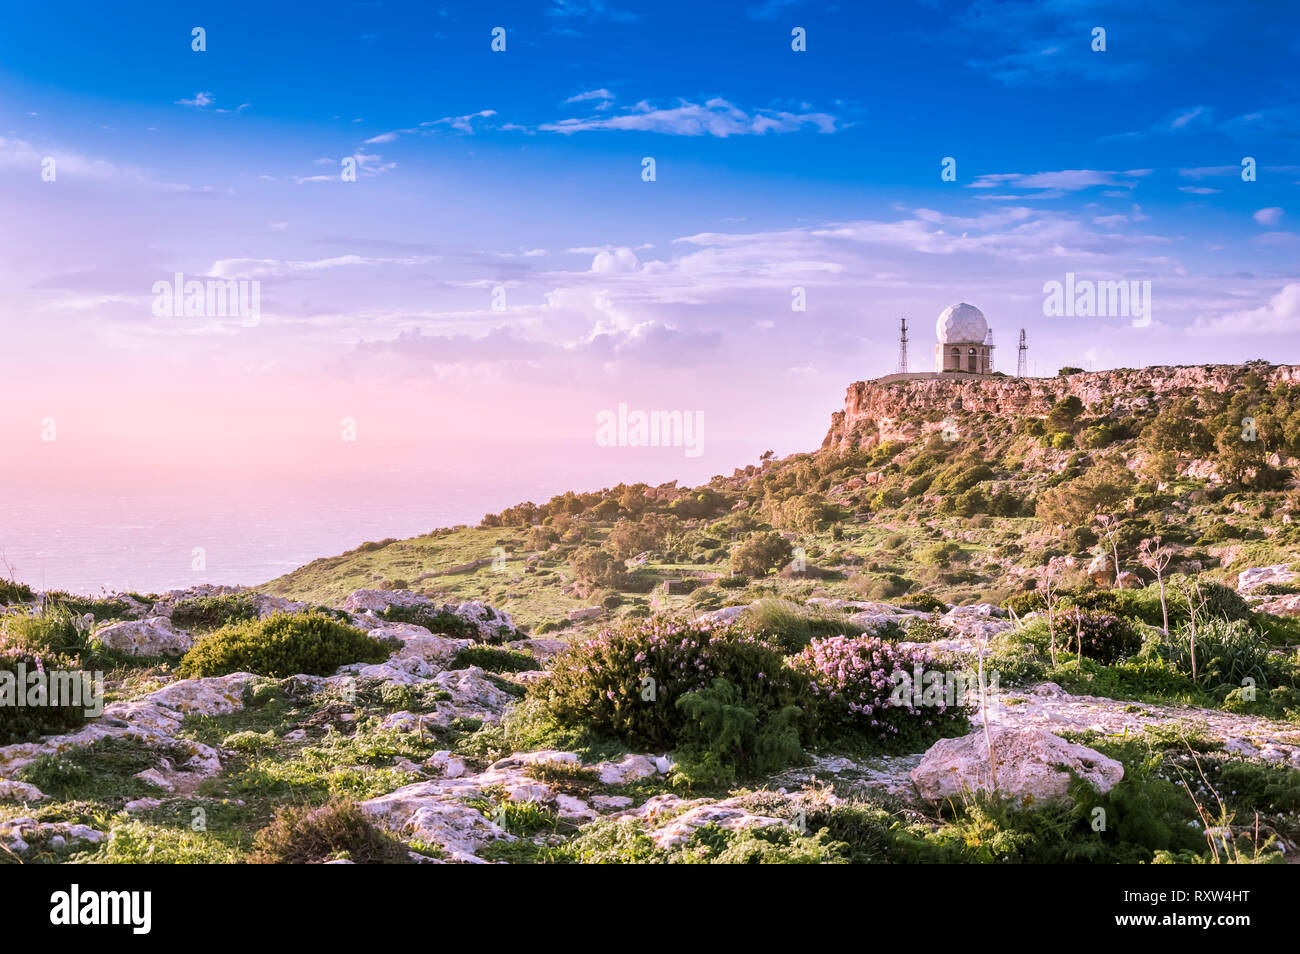 Dingli Cliffs, Malta: Panoramic road with a view over Dingli Cliffs and Aviation radar with lila flowers in forground. Romantic purple toning Stock Photo